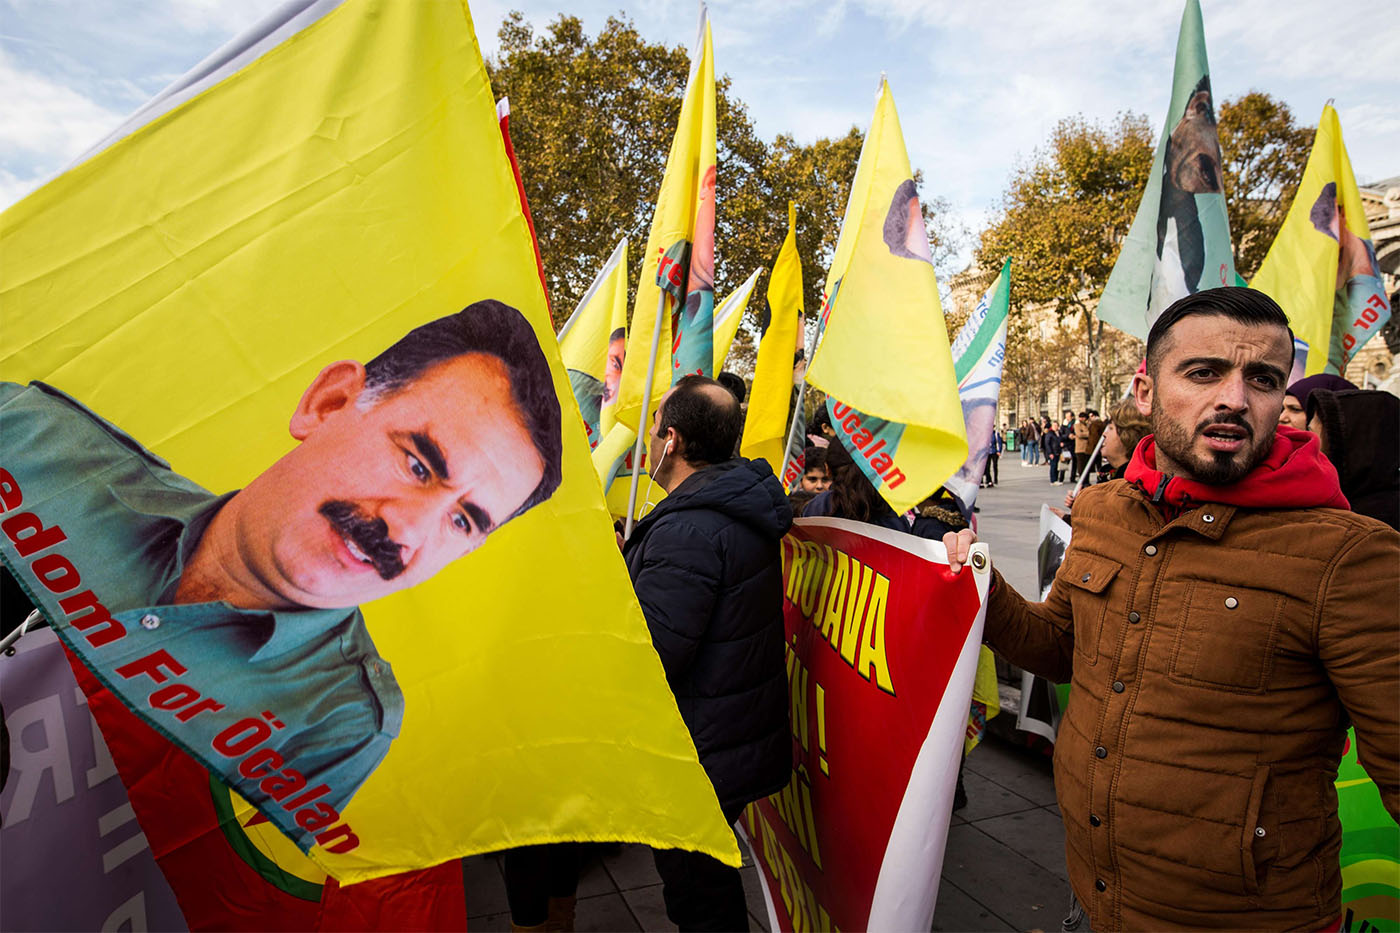 Kurdish protesters take part in a demonstration in Paris demanding the freedom of jailed Kurdistan Workers' Party (PKK) leader Abdullah Ocalan